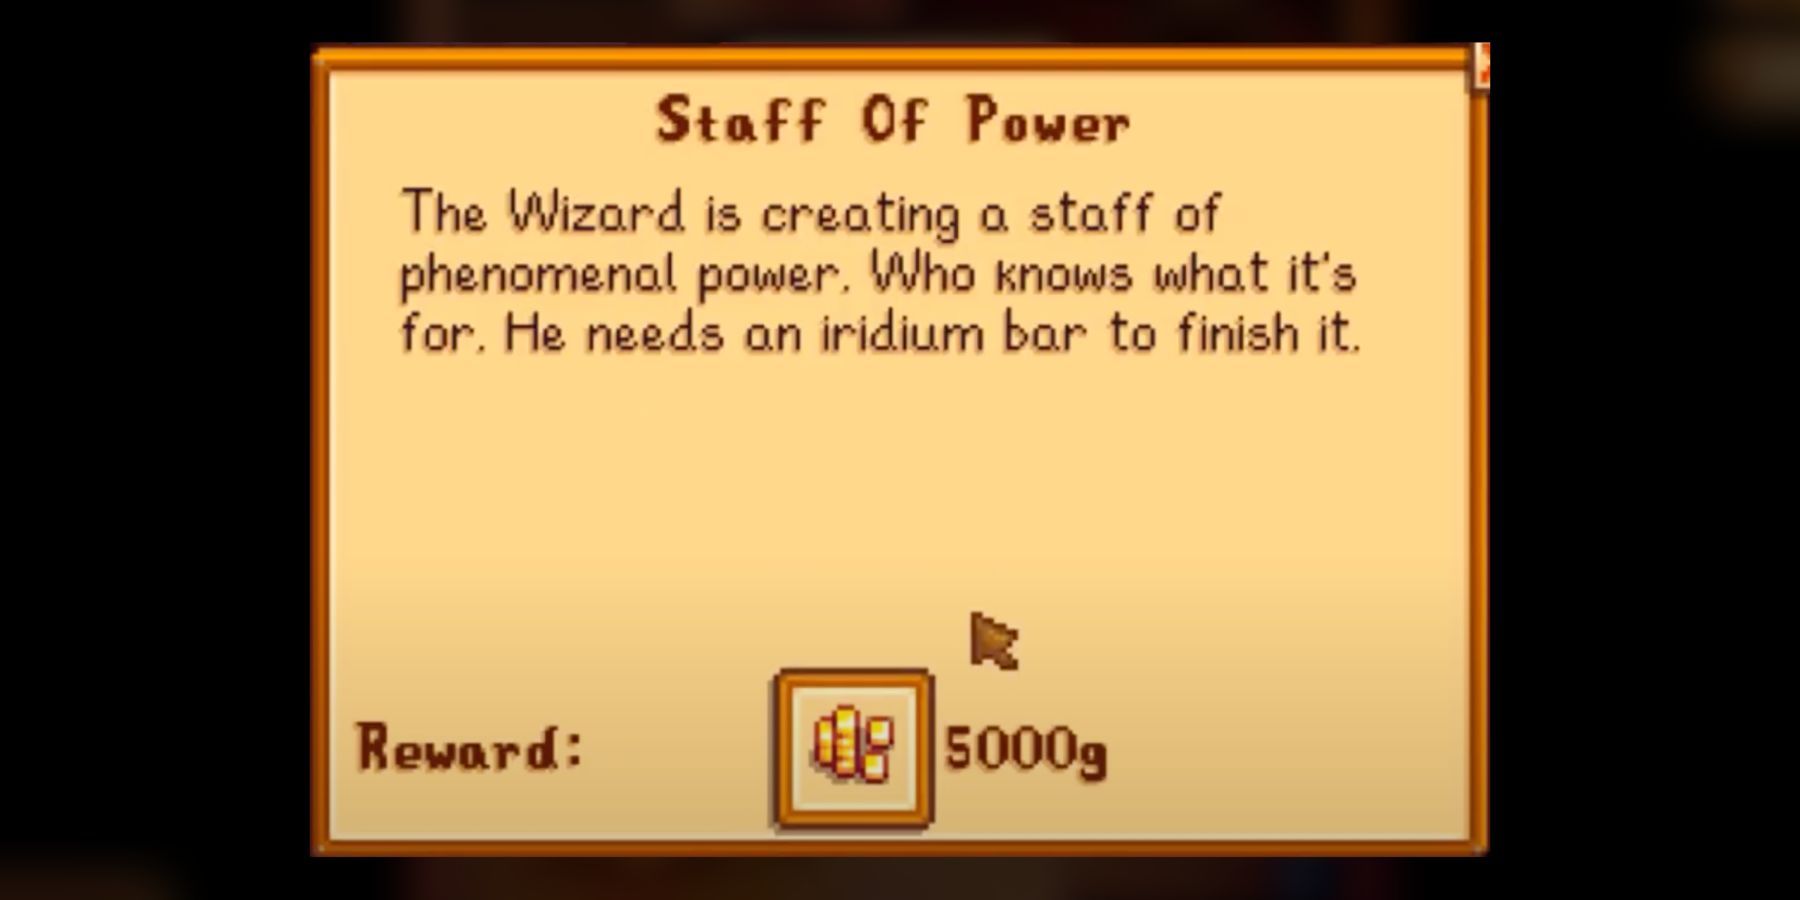 the rewards for the staff of power quest.